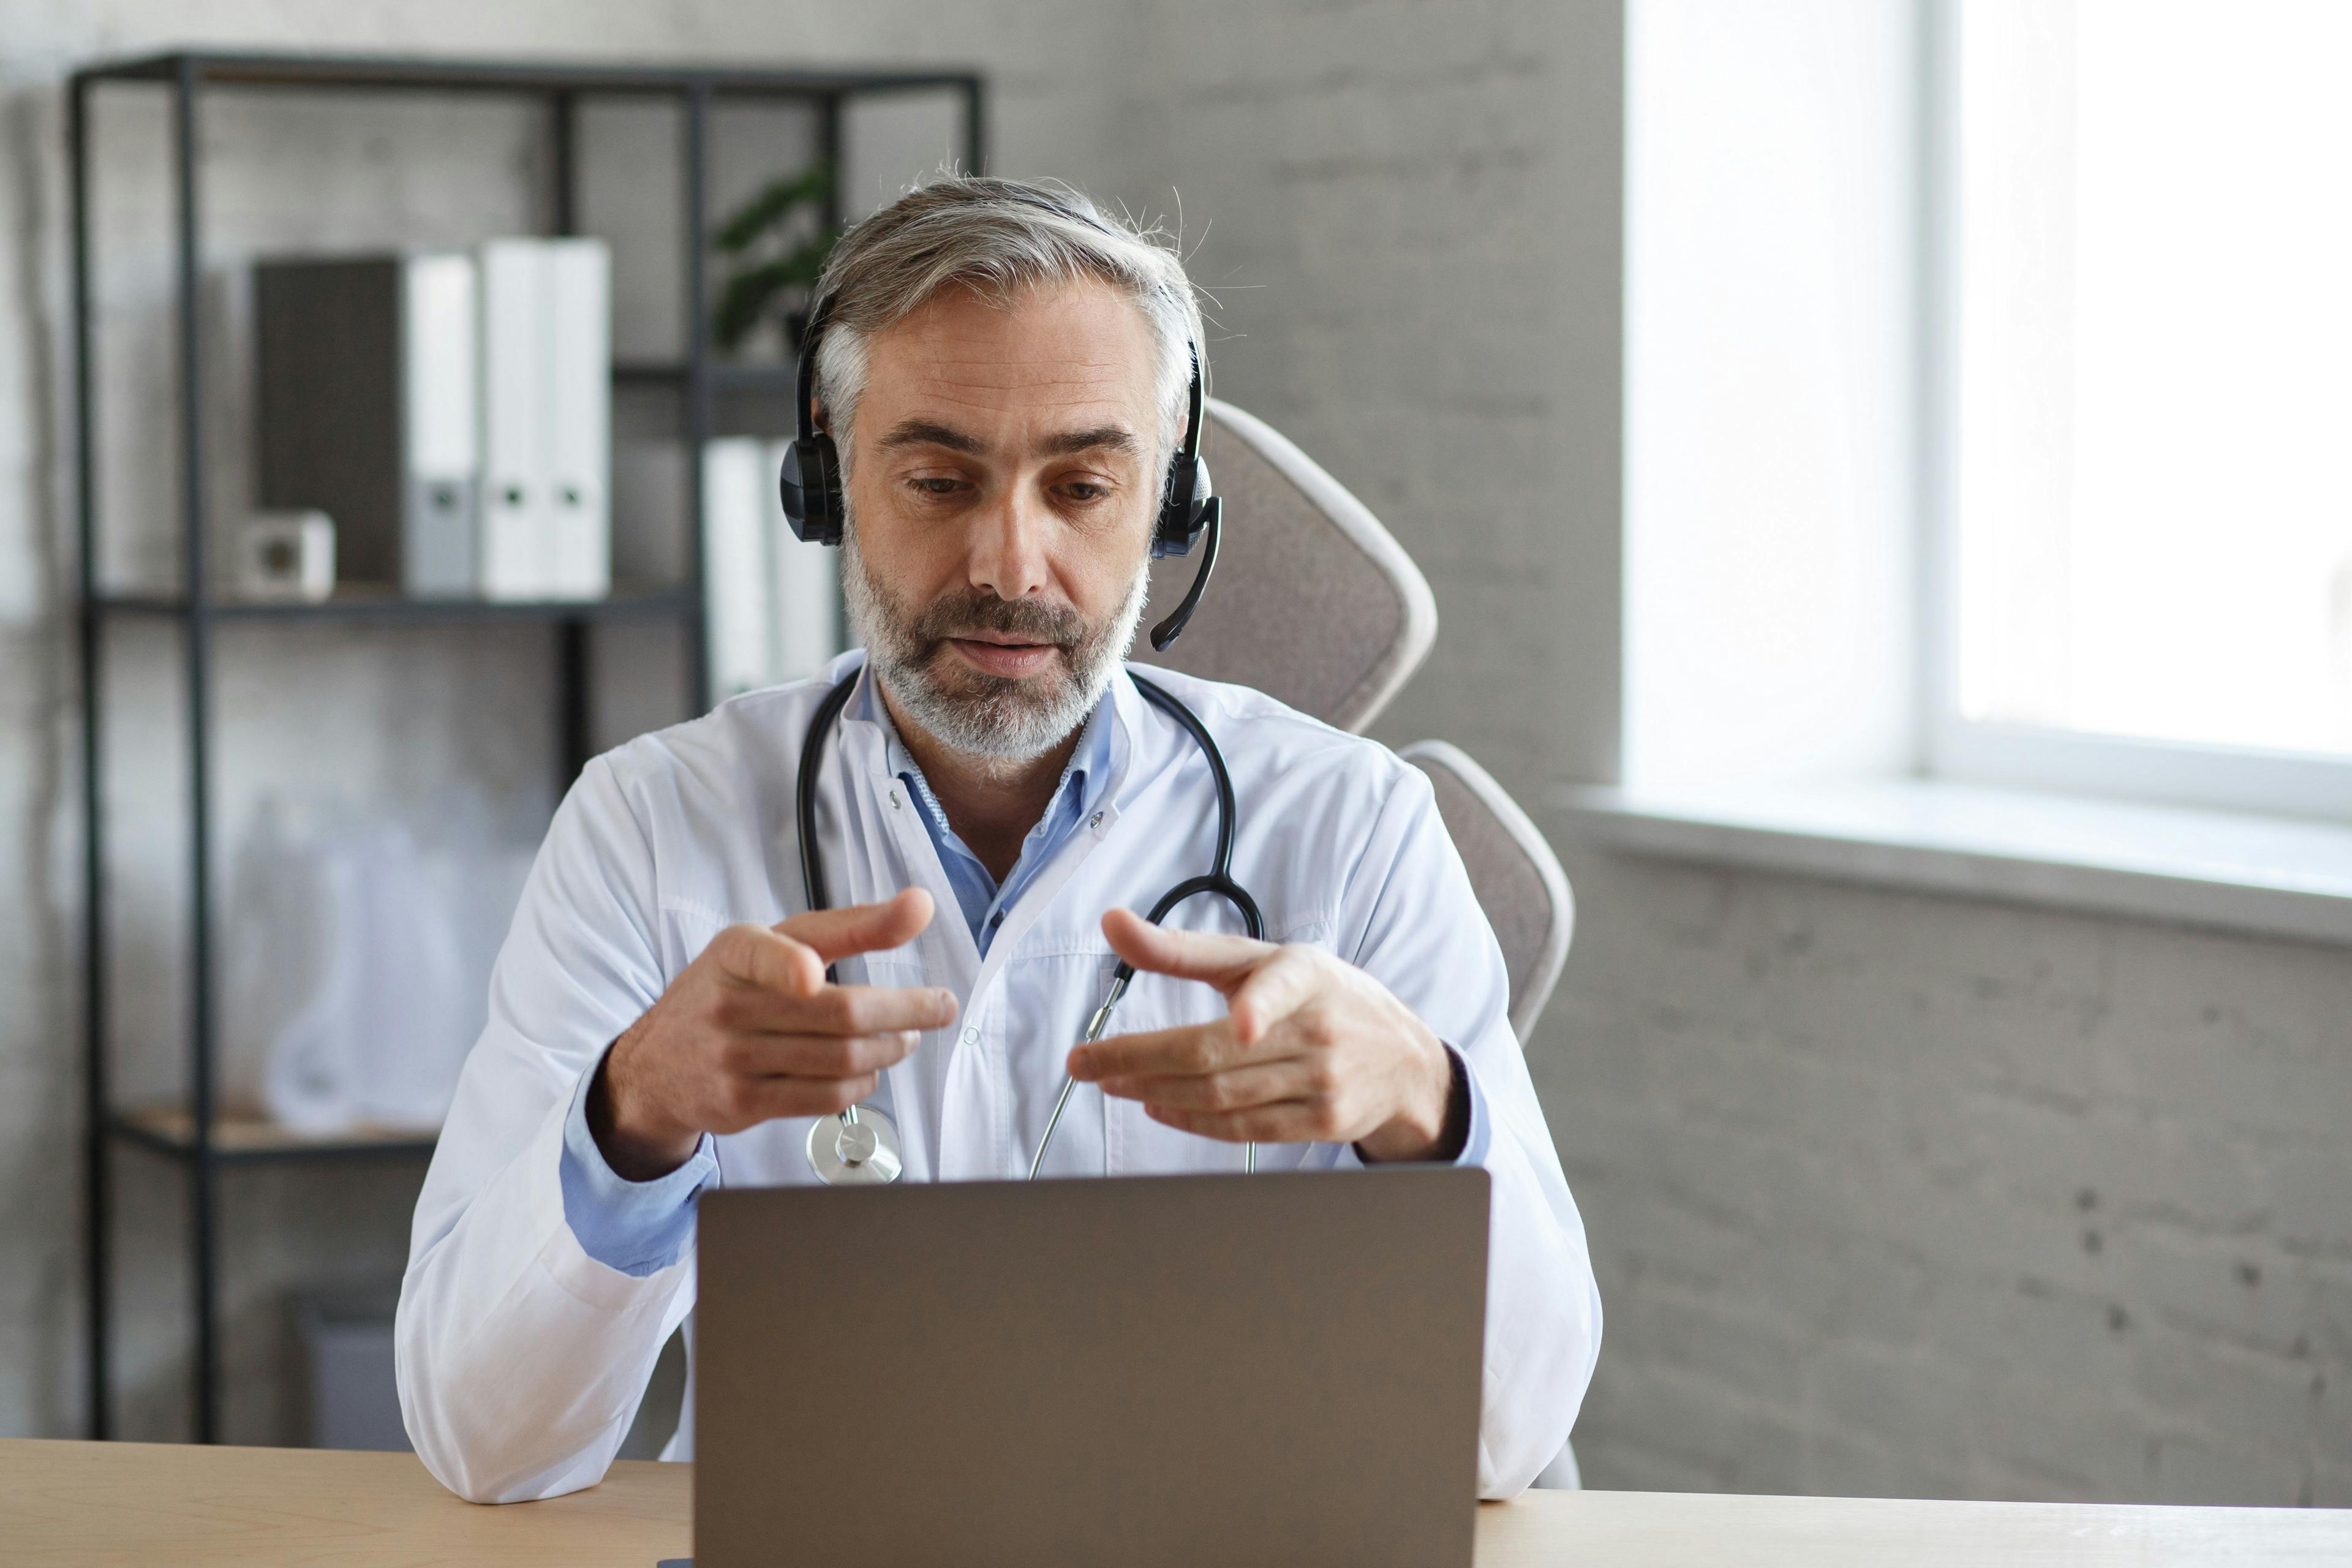 Telehealth and nursing homes: 9 takeaways from a key study